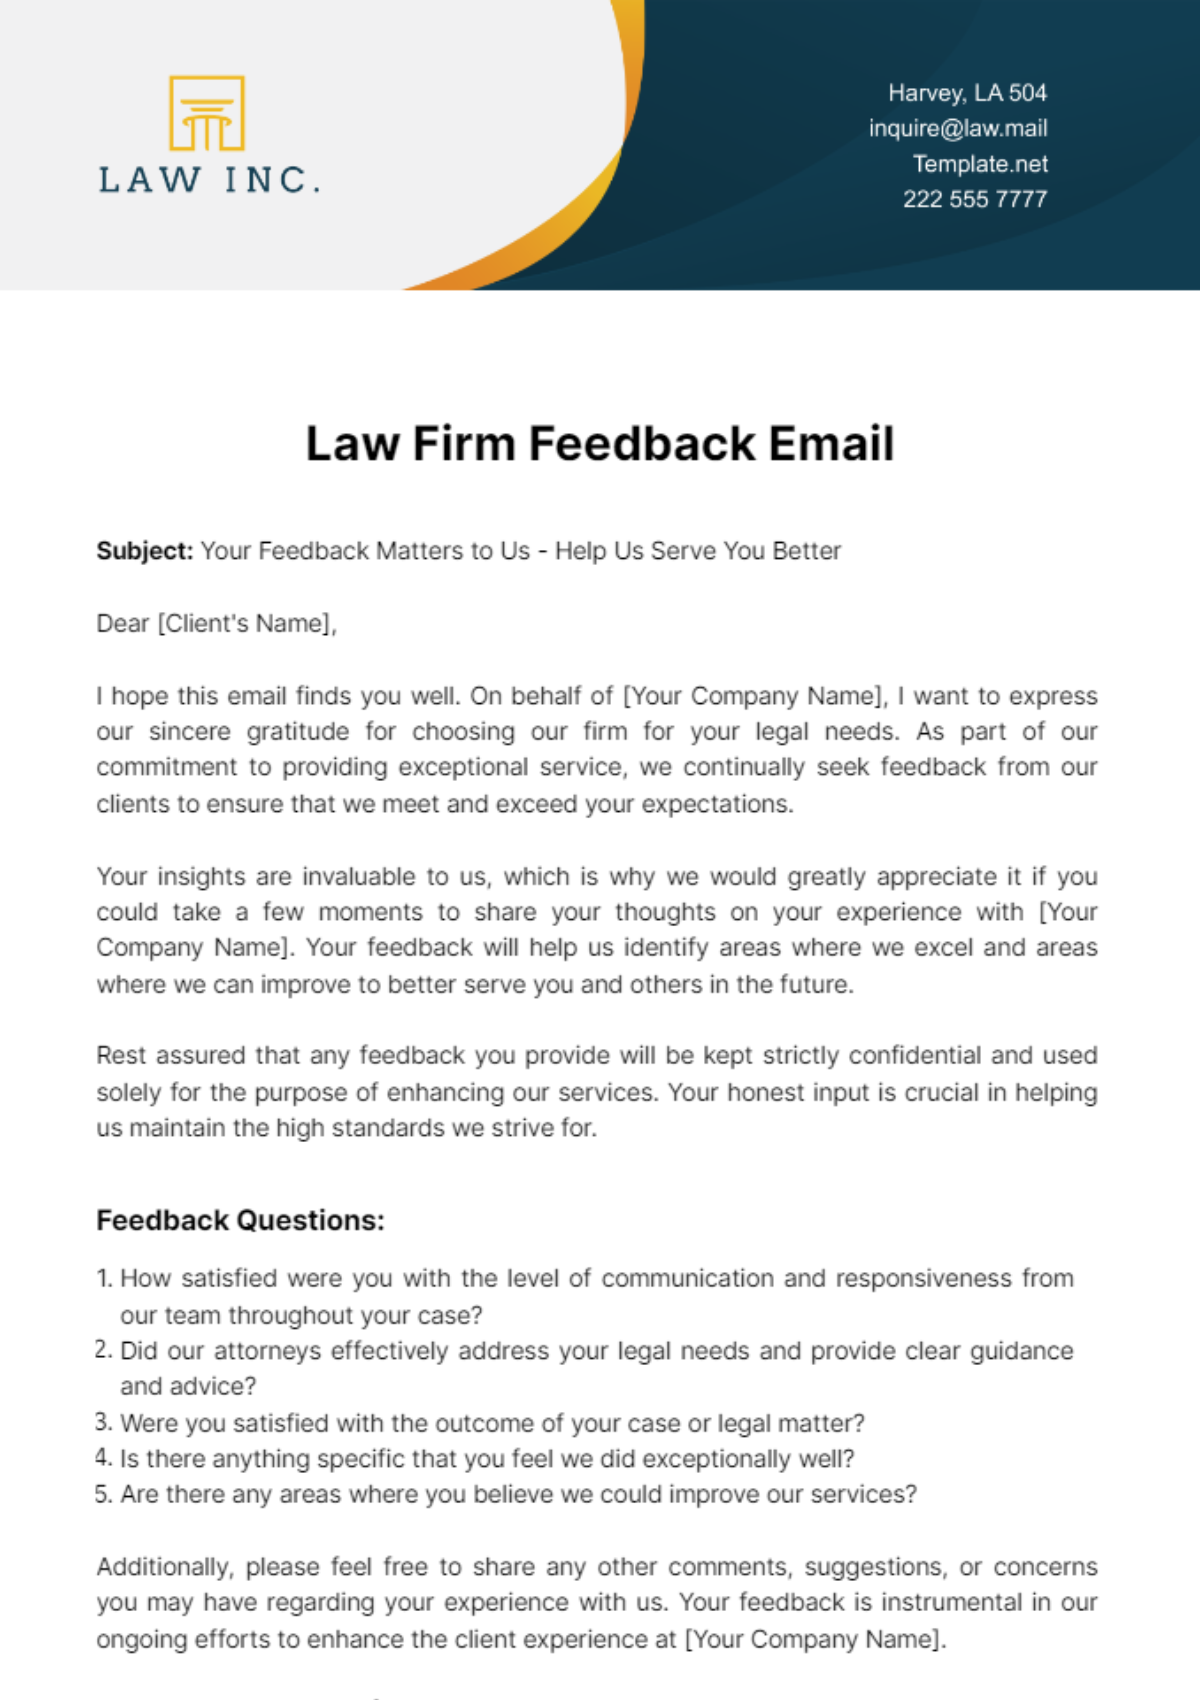 Law Firm Feedback Email Template